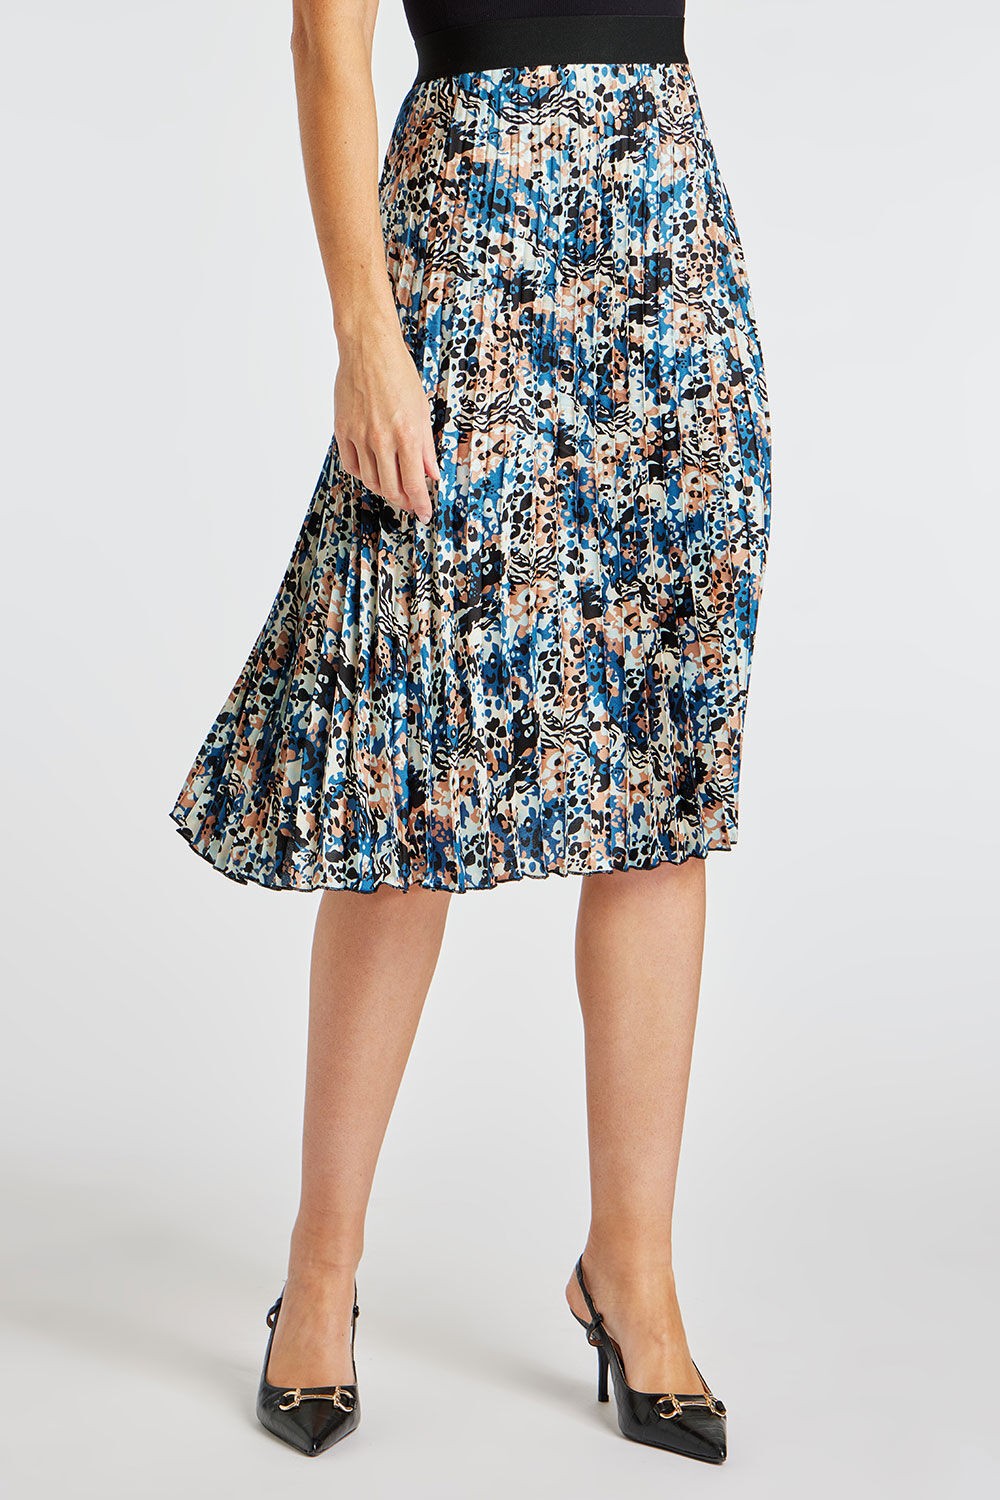 Bonmarche Brown Animal Patchwork Print Elasticated Pleated Skirt, Size: 18